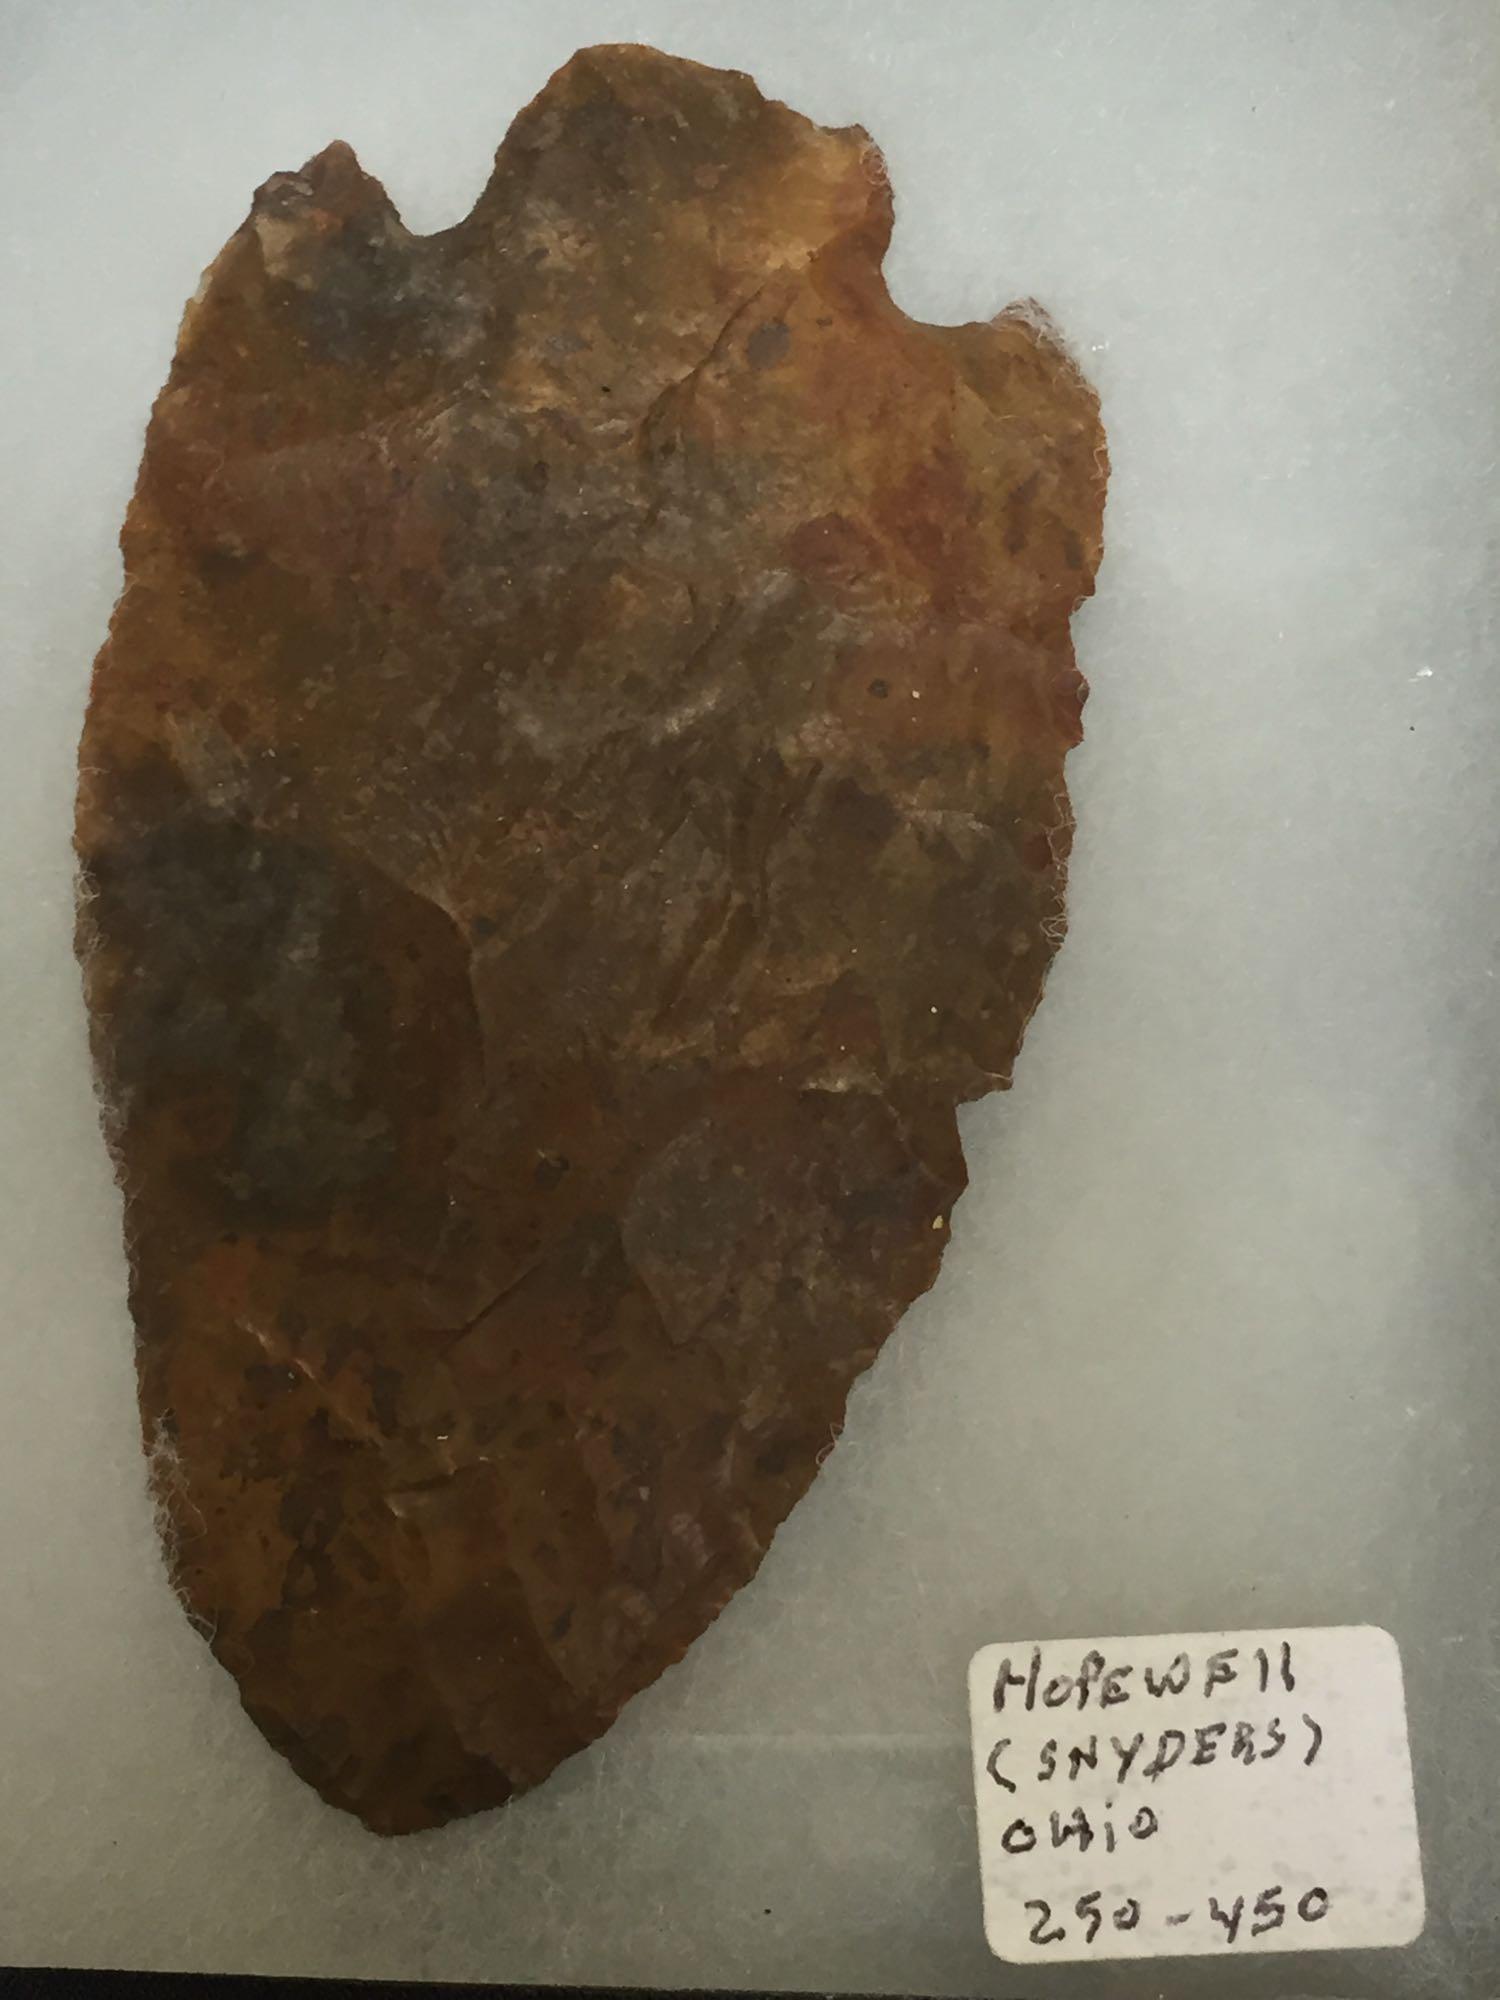 Indian Spear or Arrow Head, says Hopewell Snyders Ohio 250-450